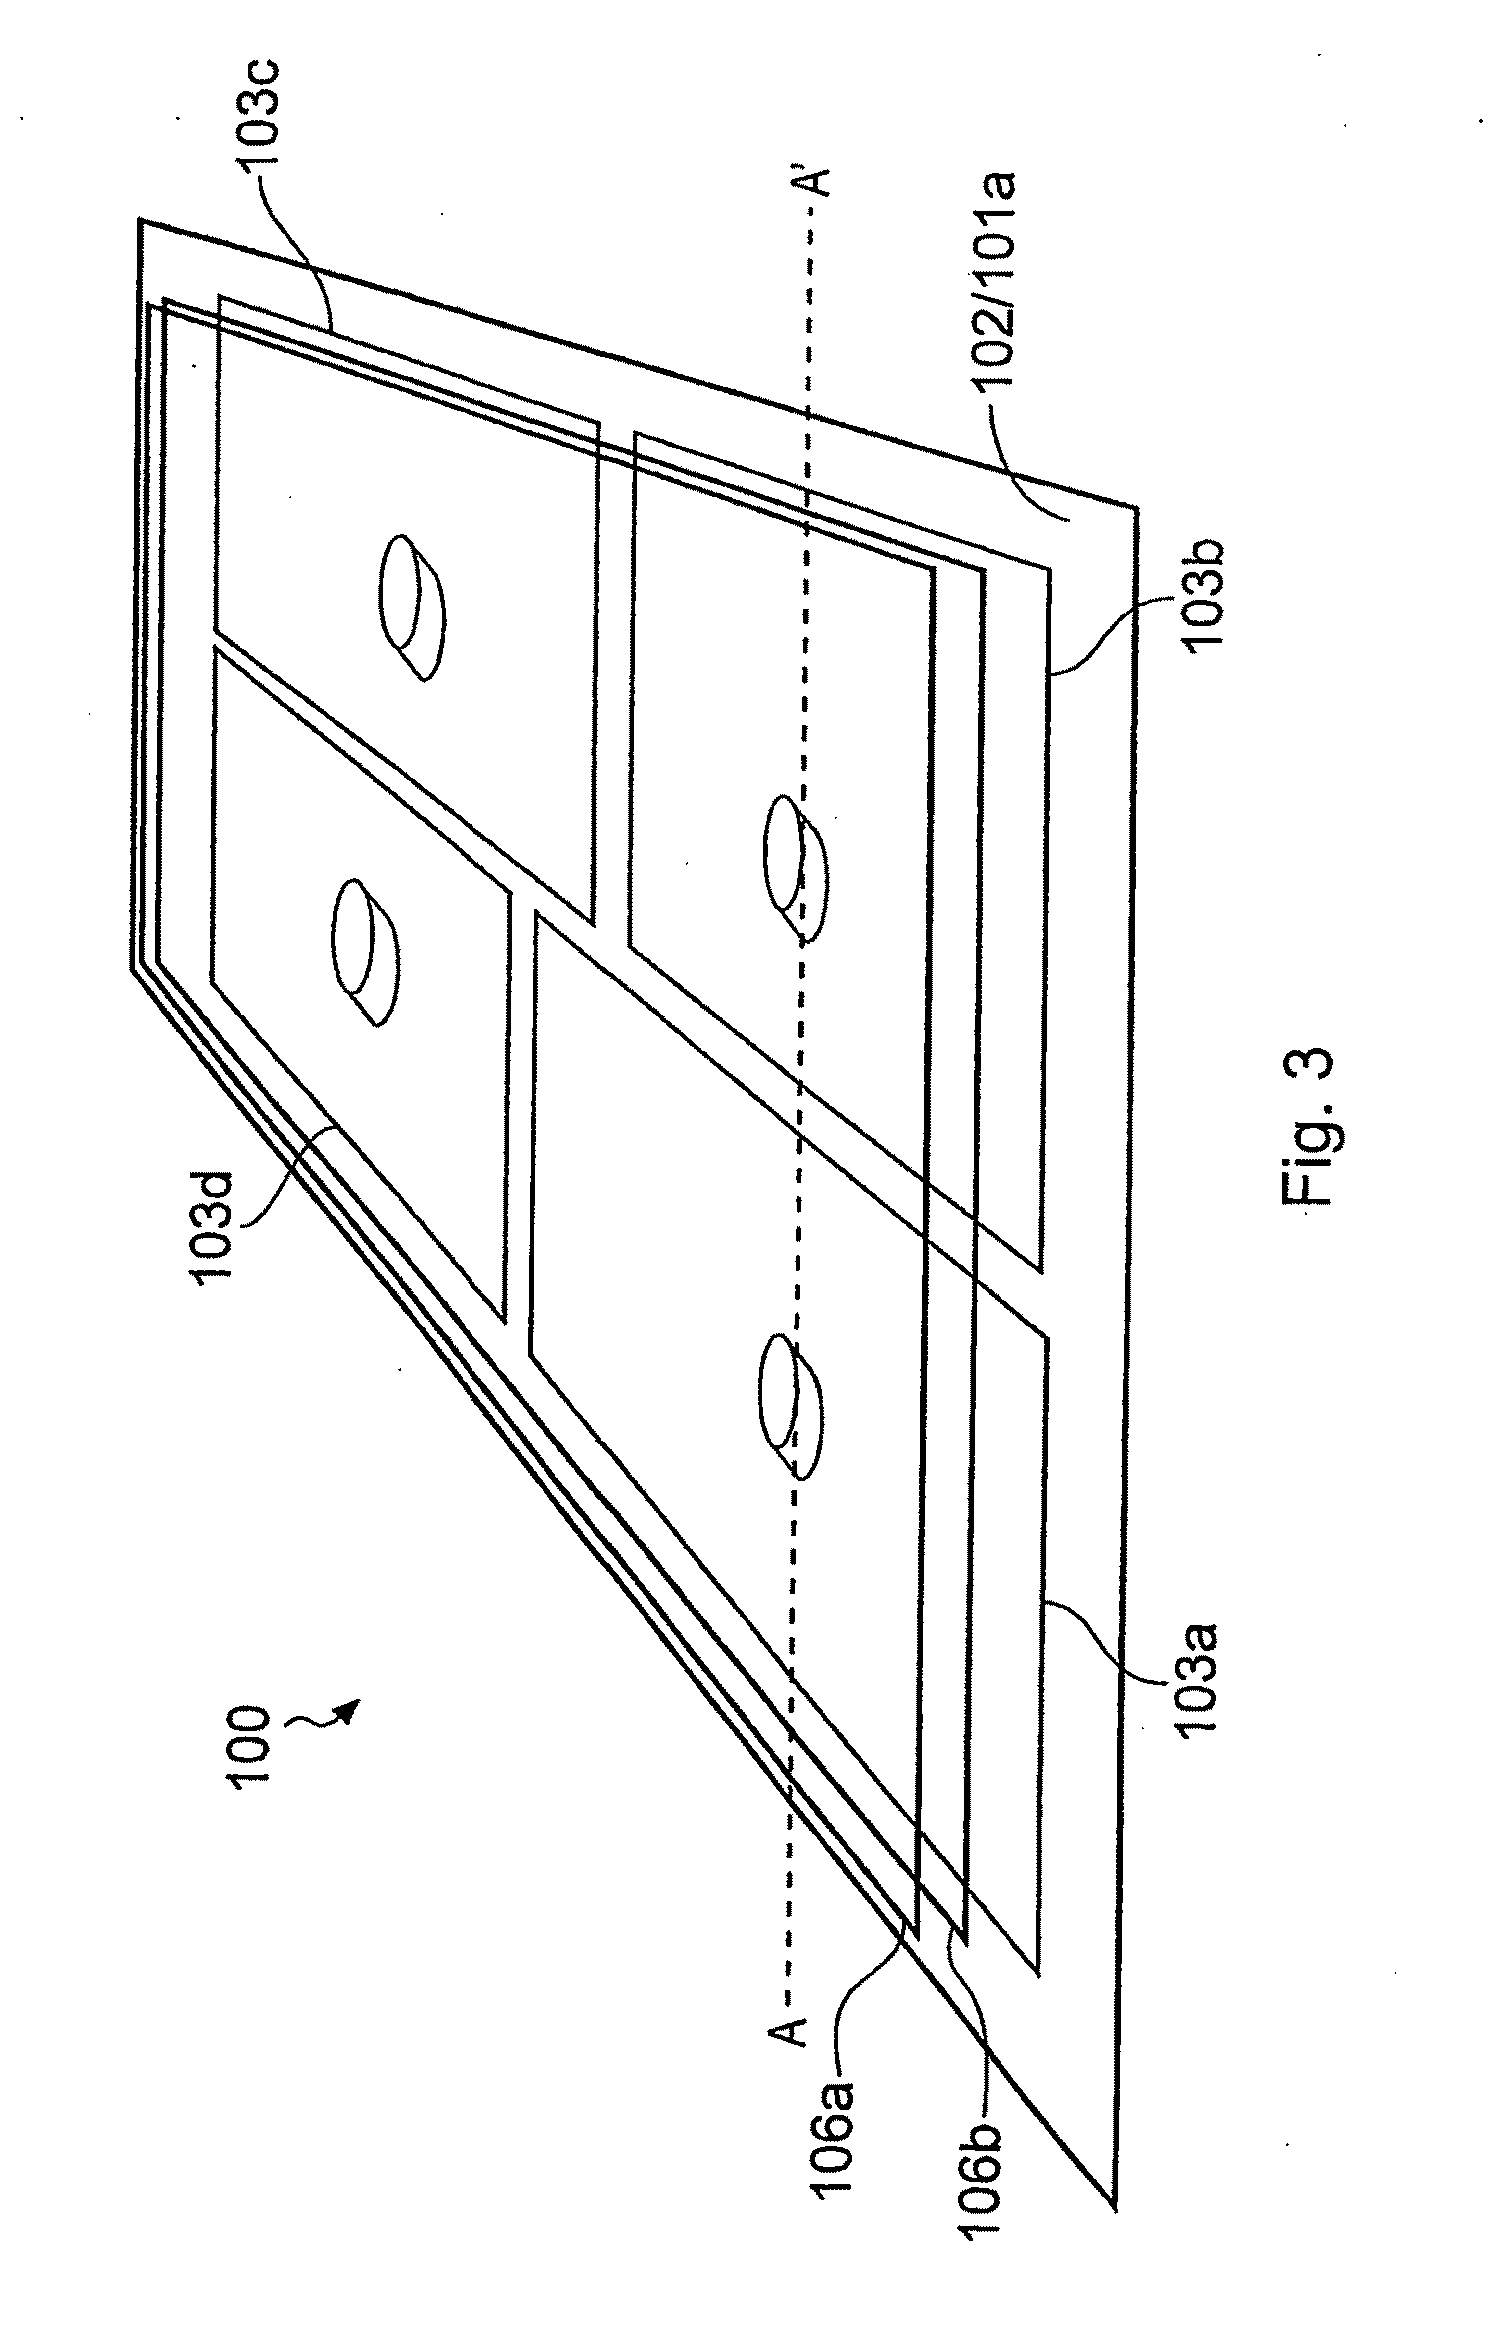 Bus interconnect device and a data processing apparatus including such a bus interconnect device